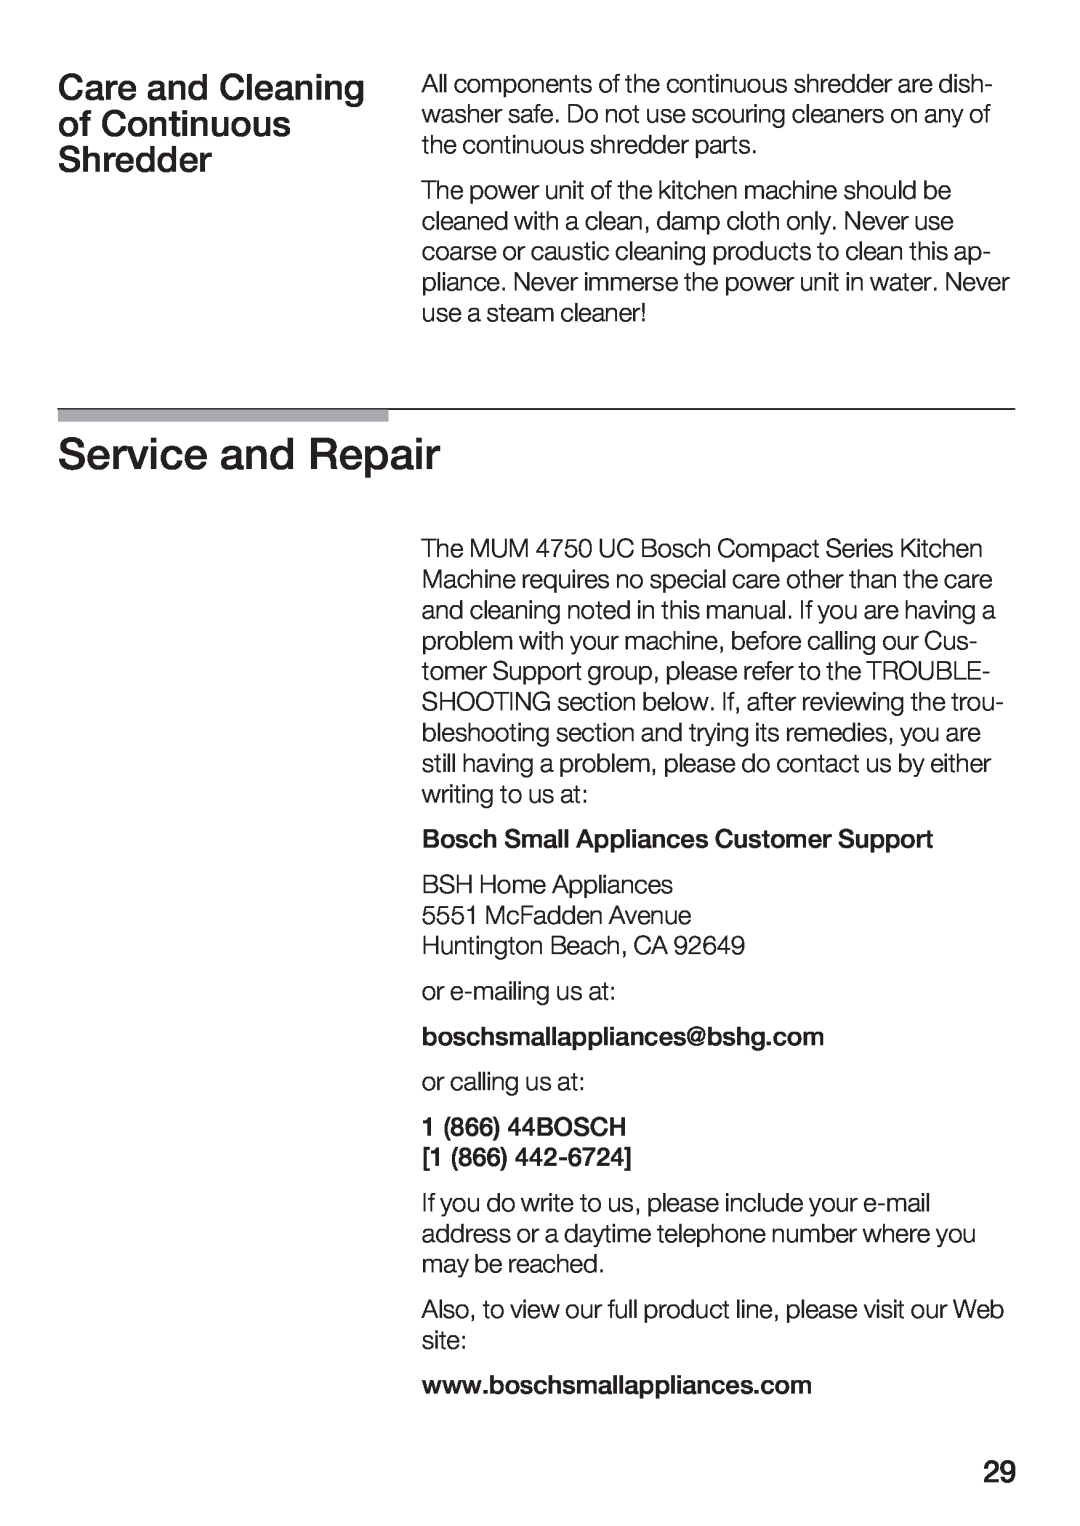 Bosch Appliances MUM 4750 UC manual Service and Repair, Care and Cleaning All, ofContinuous, Shredder 